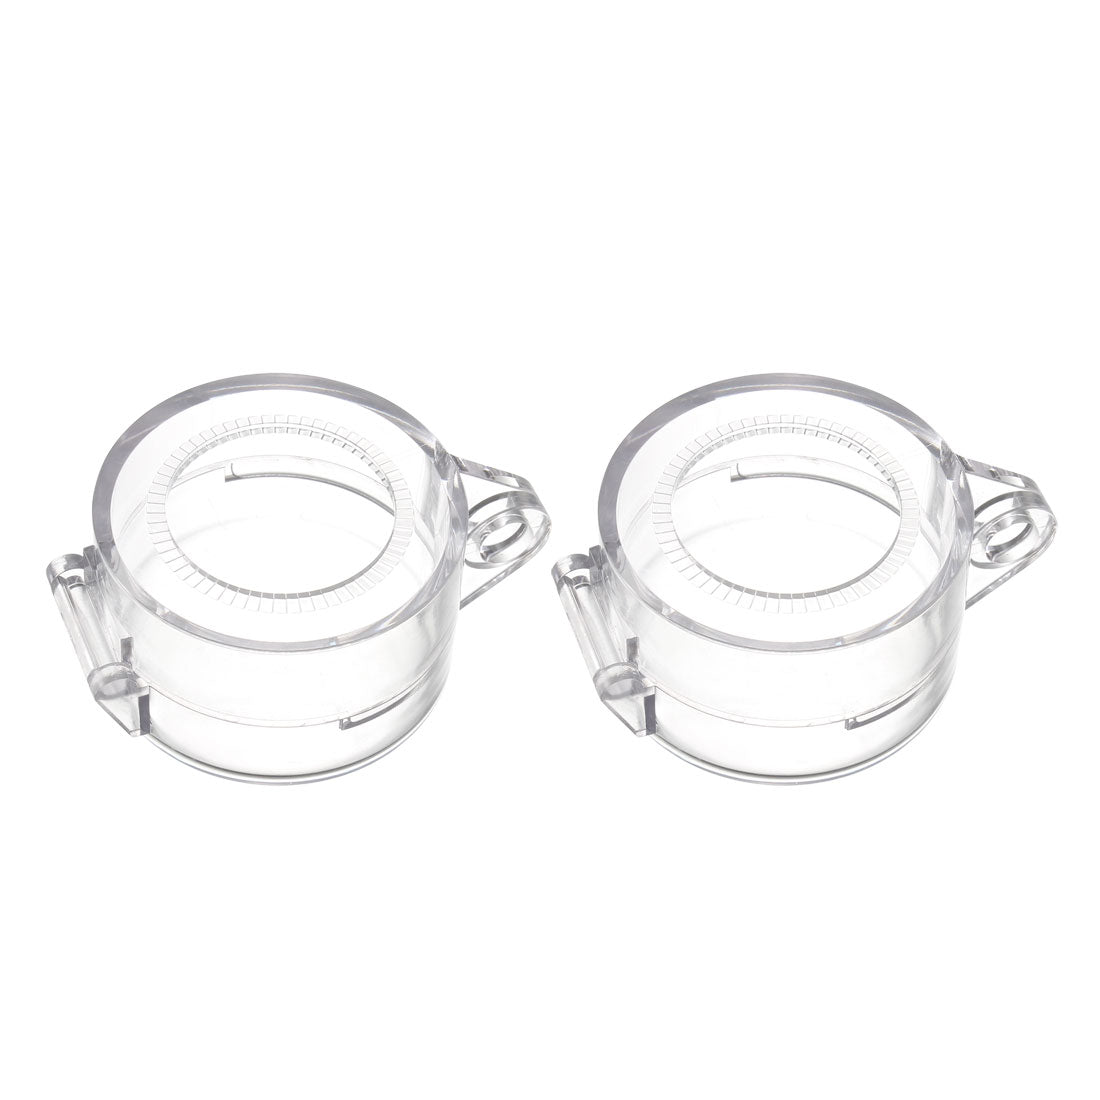 Uxcell Uxcell 2pcs Clear Plastic Switch Cover Protector for 30mm Diameter Push Button Switch 50*32